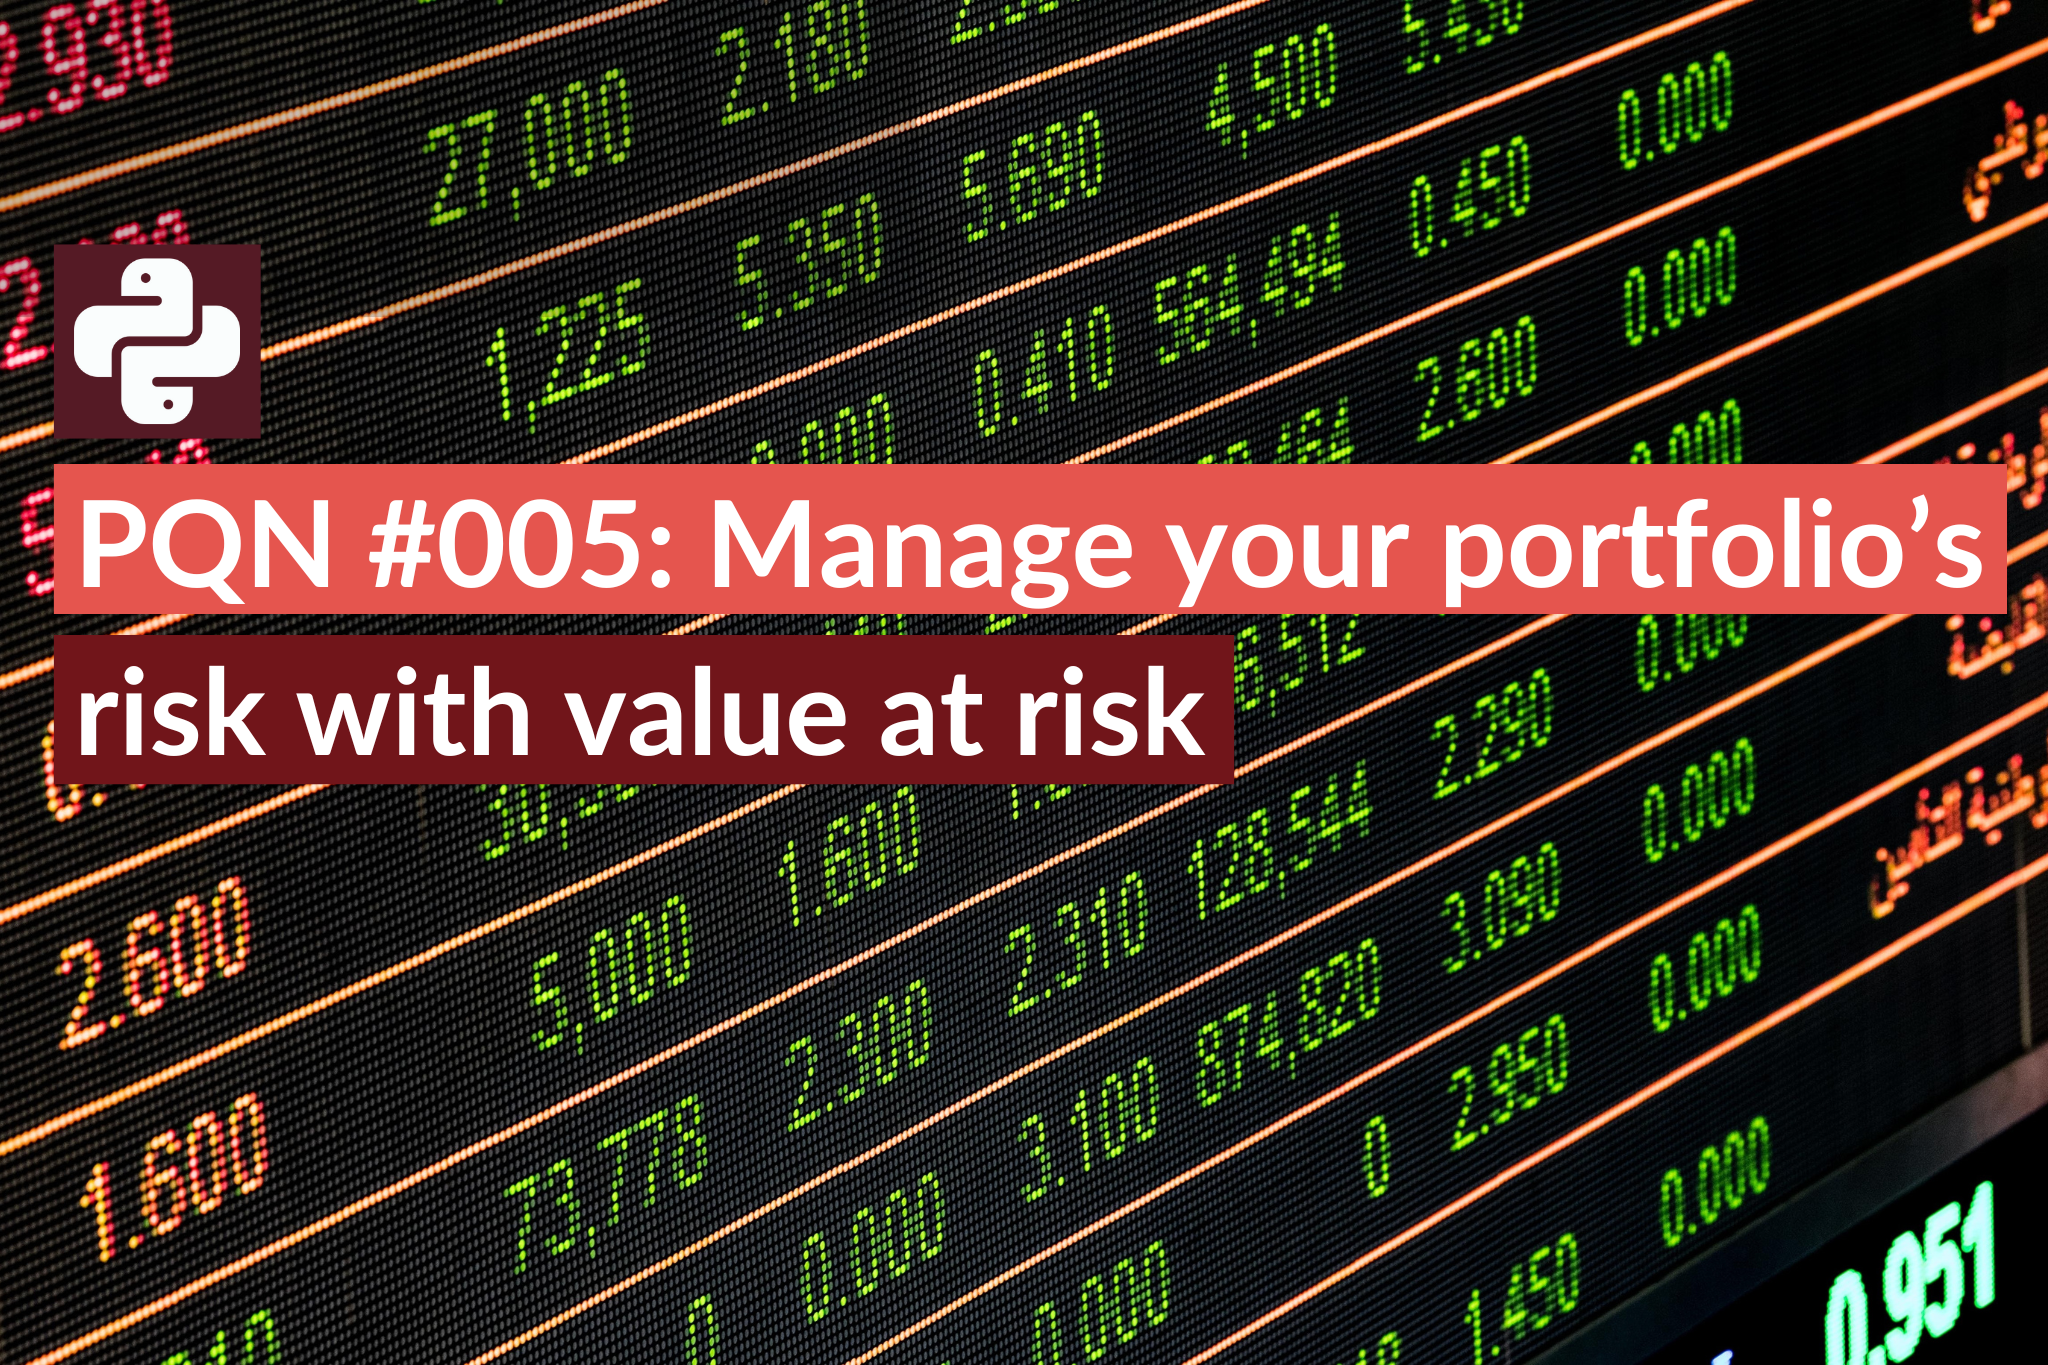 PQN #005 Manage your portfolio’s risk with value at risk